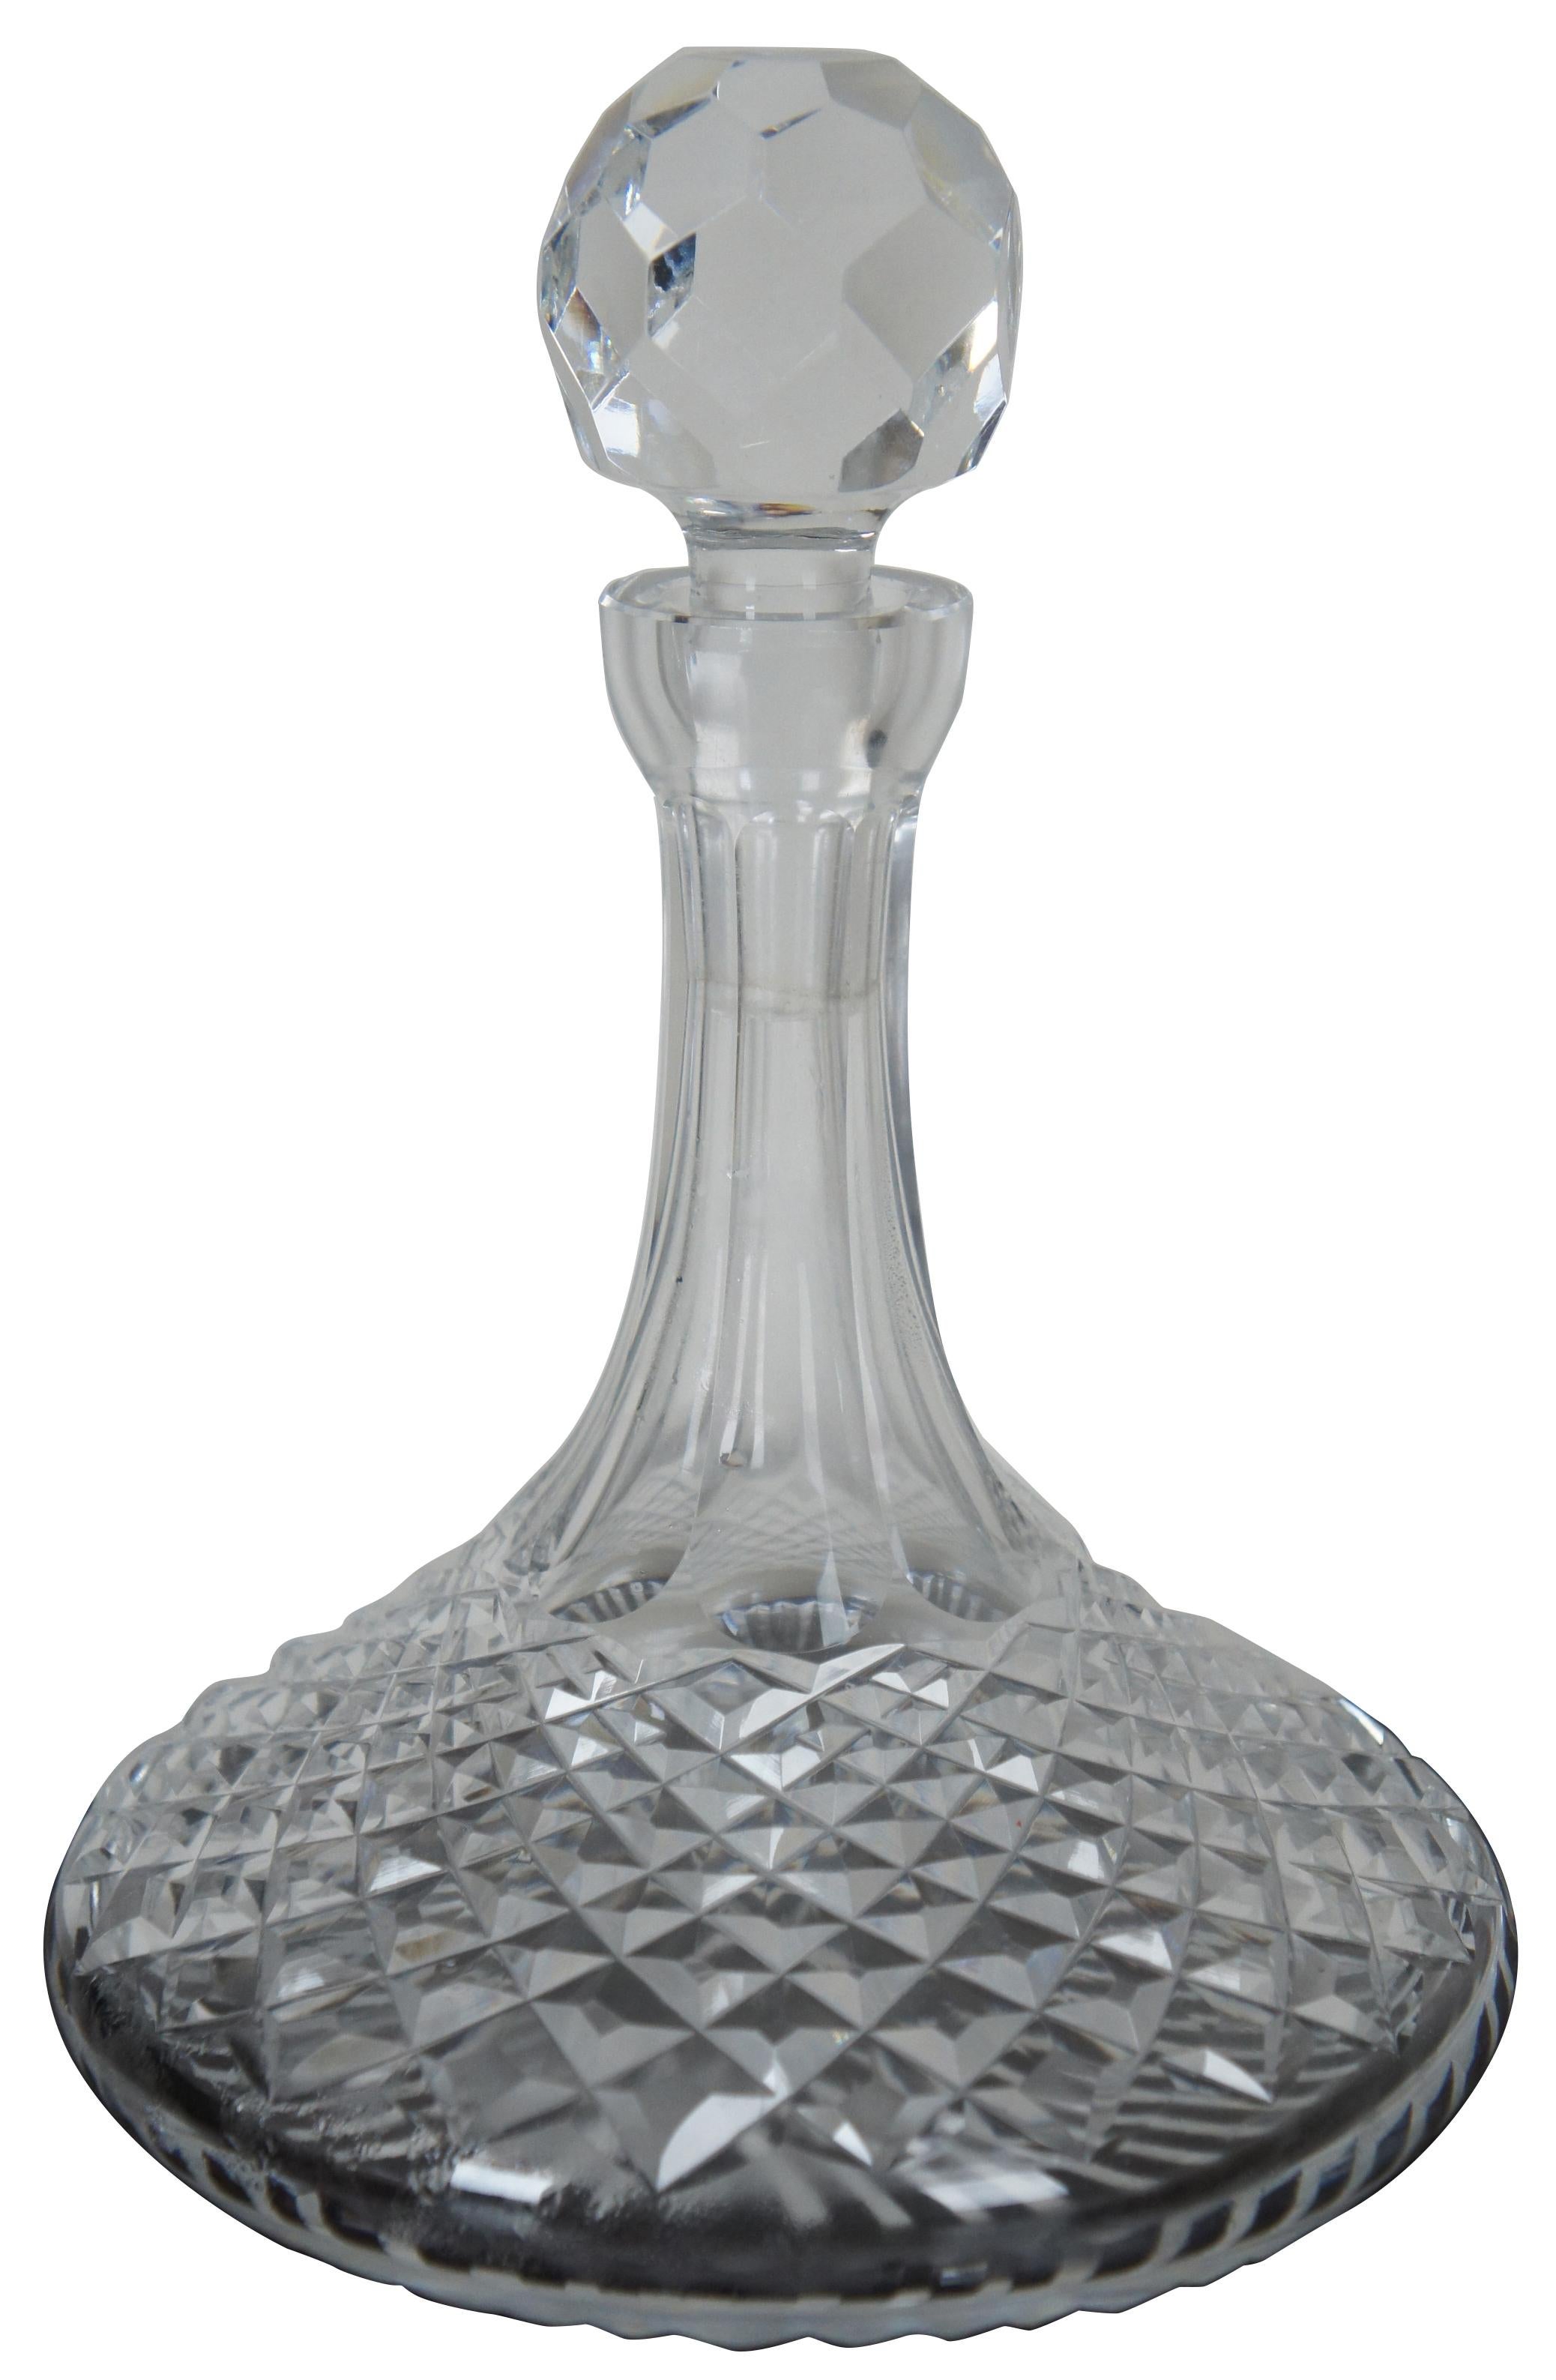 waterford ships decanter price